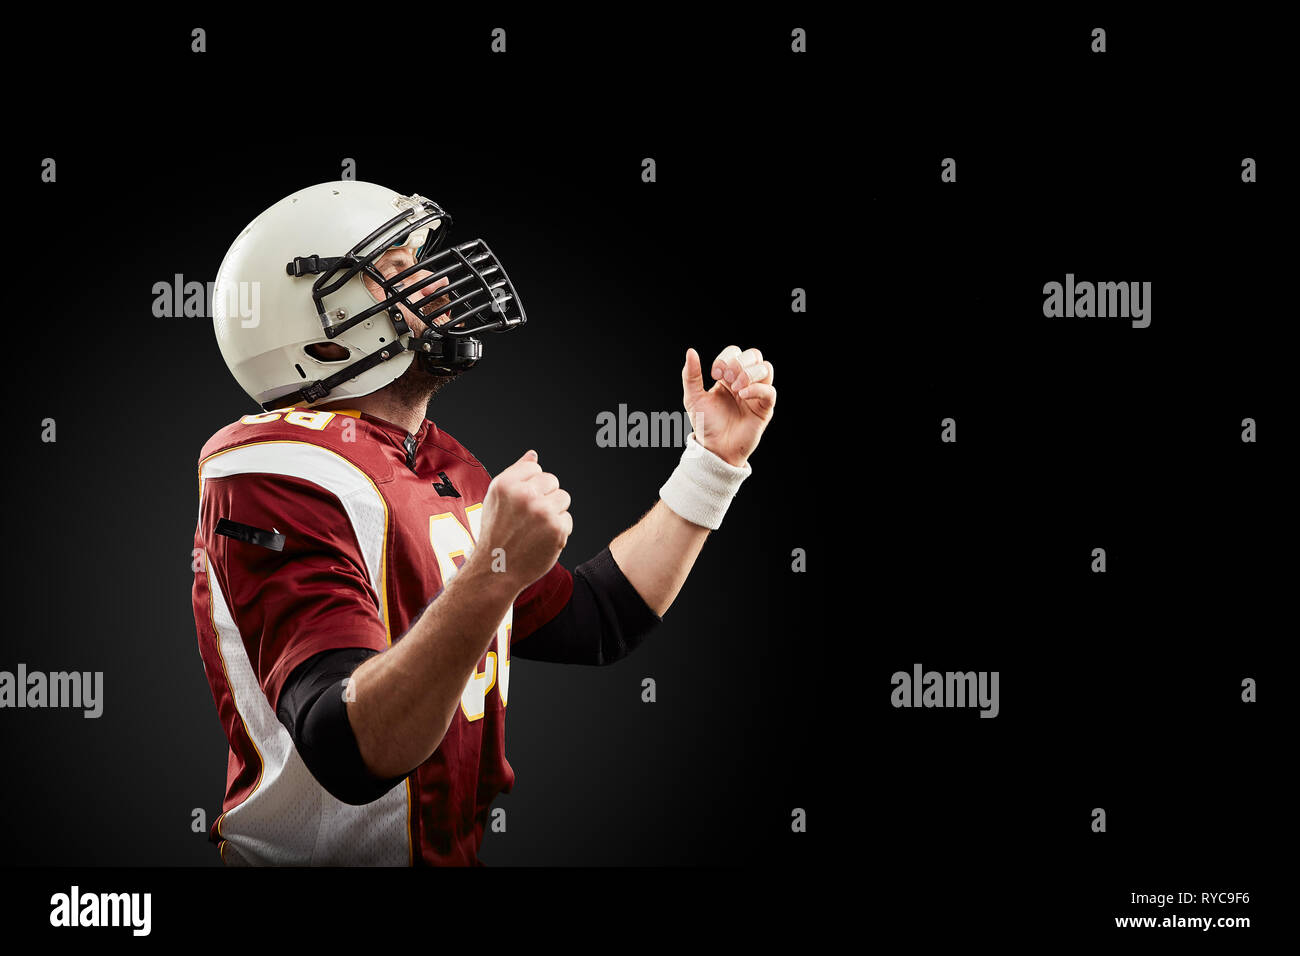 Isolated American football player rejoices in victory in black background Stock Photo